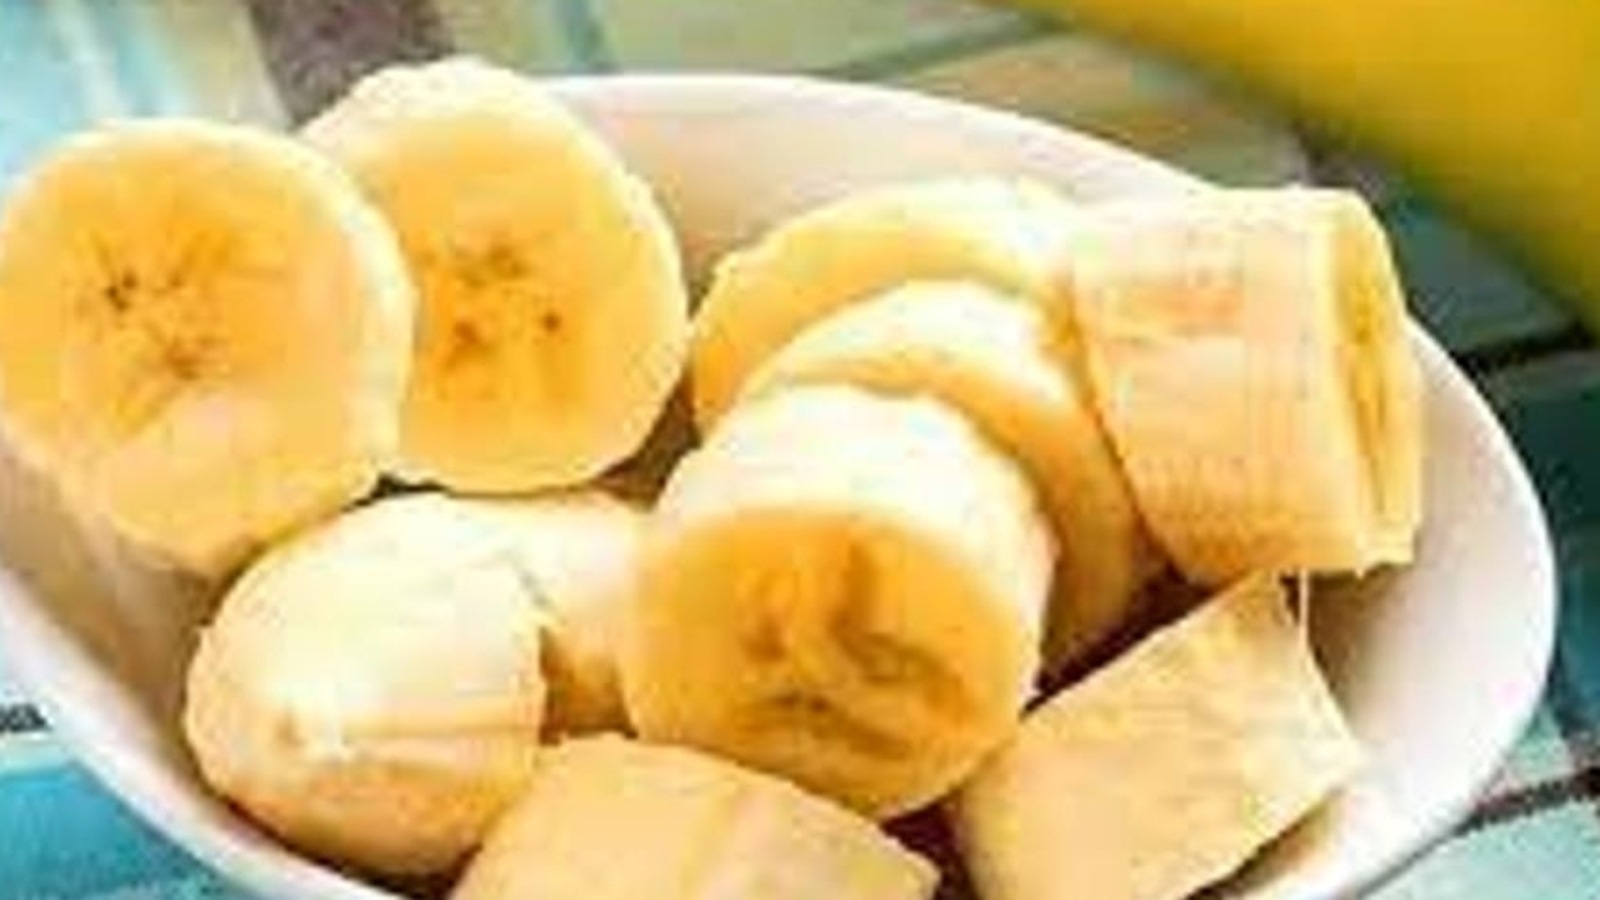 are-bananas-really-radioactive-an-expert-clears-up-common-misunderstanding